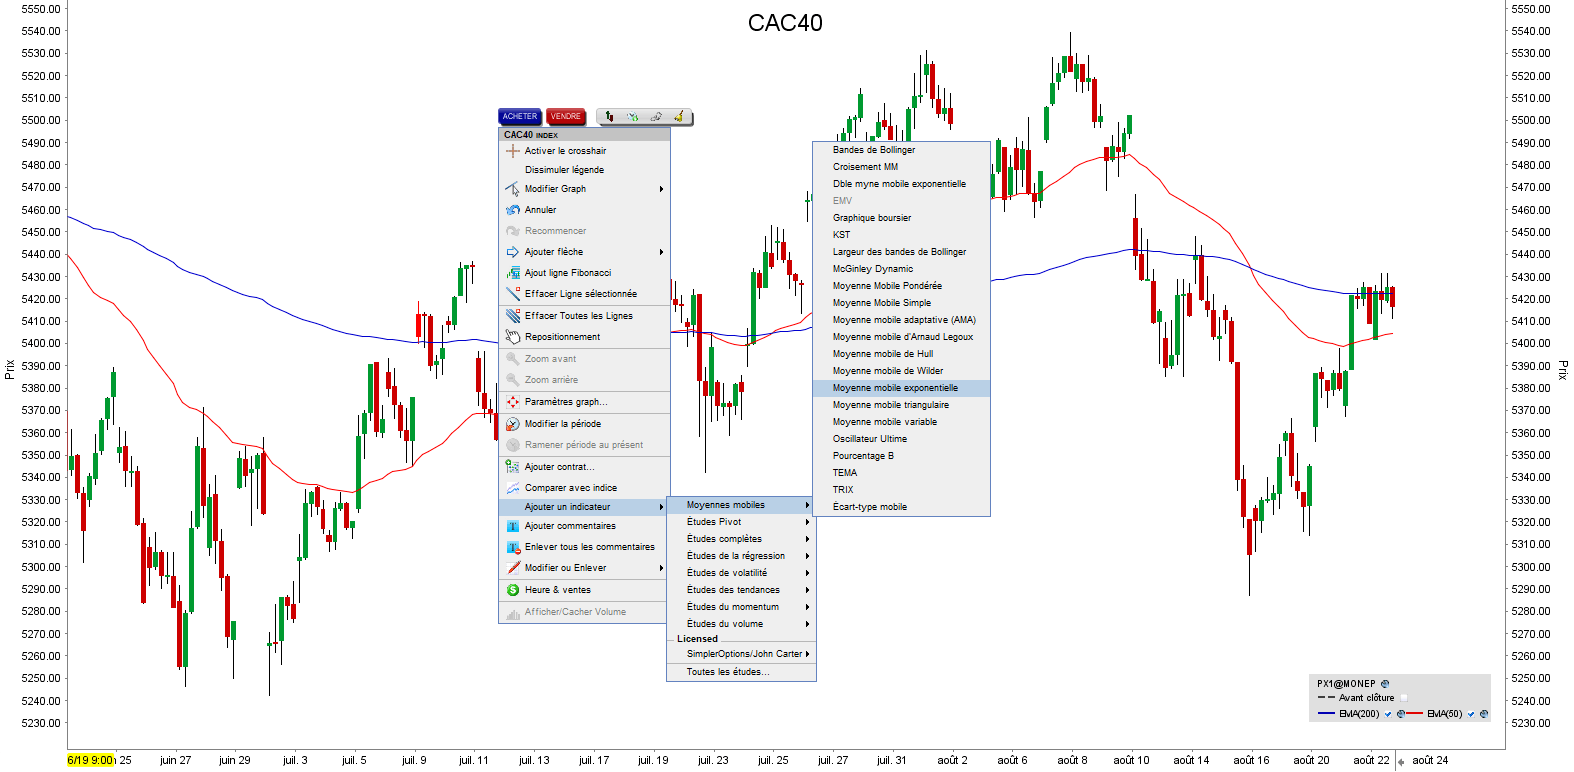 CAC40 in LYNX BROKER Trading Platform tools - Les indicateur Moving Average - moyenne mobile 